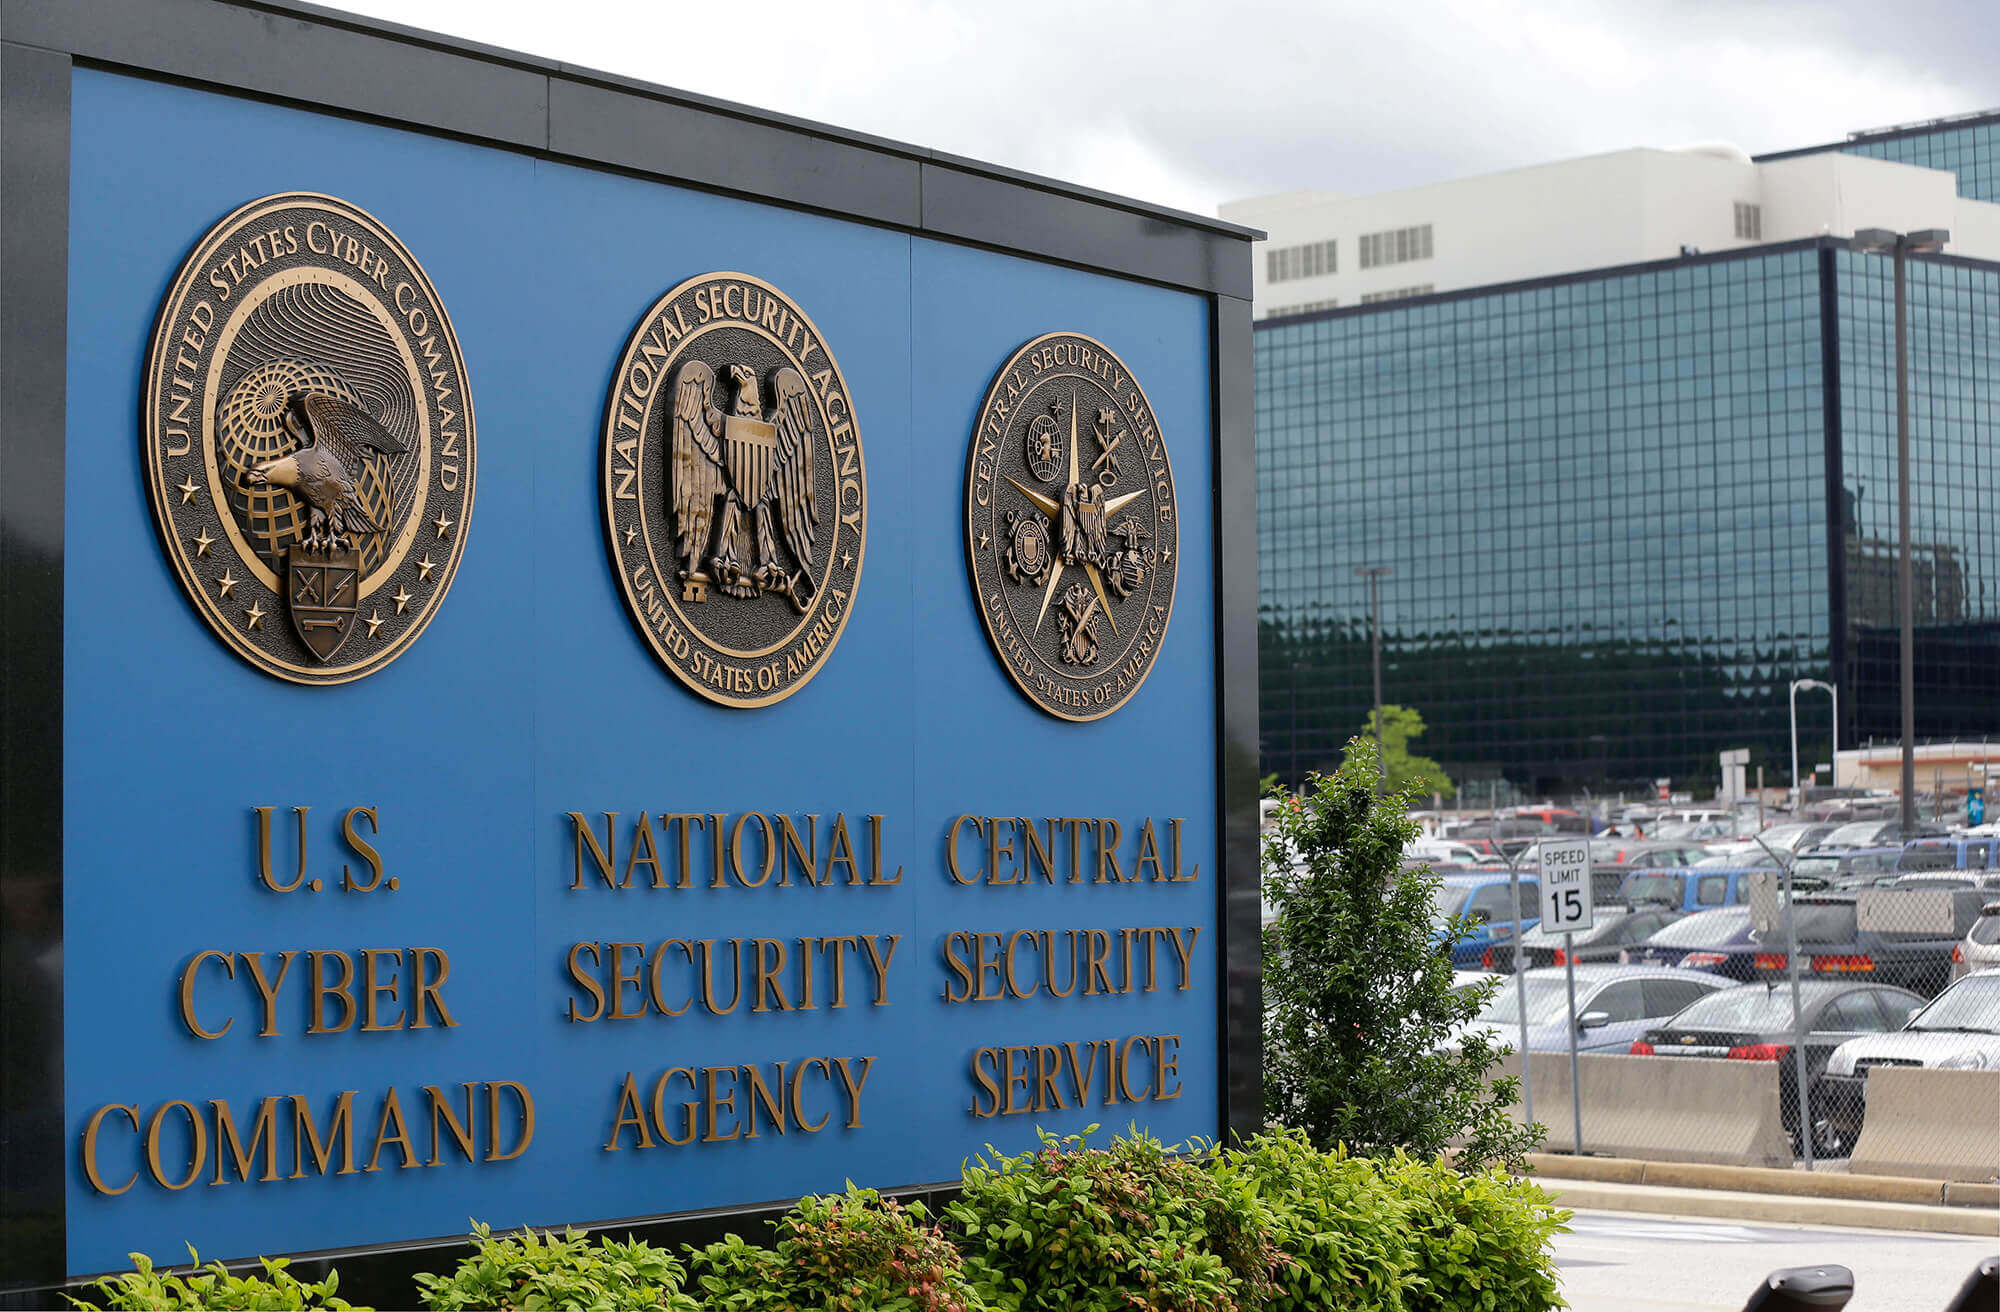 Image of the NSA building